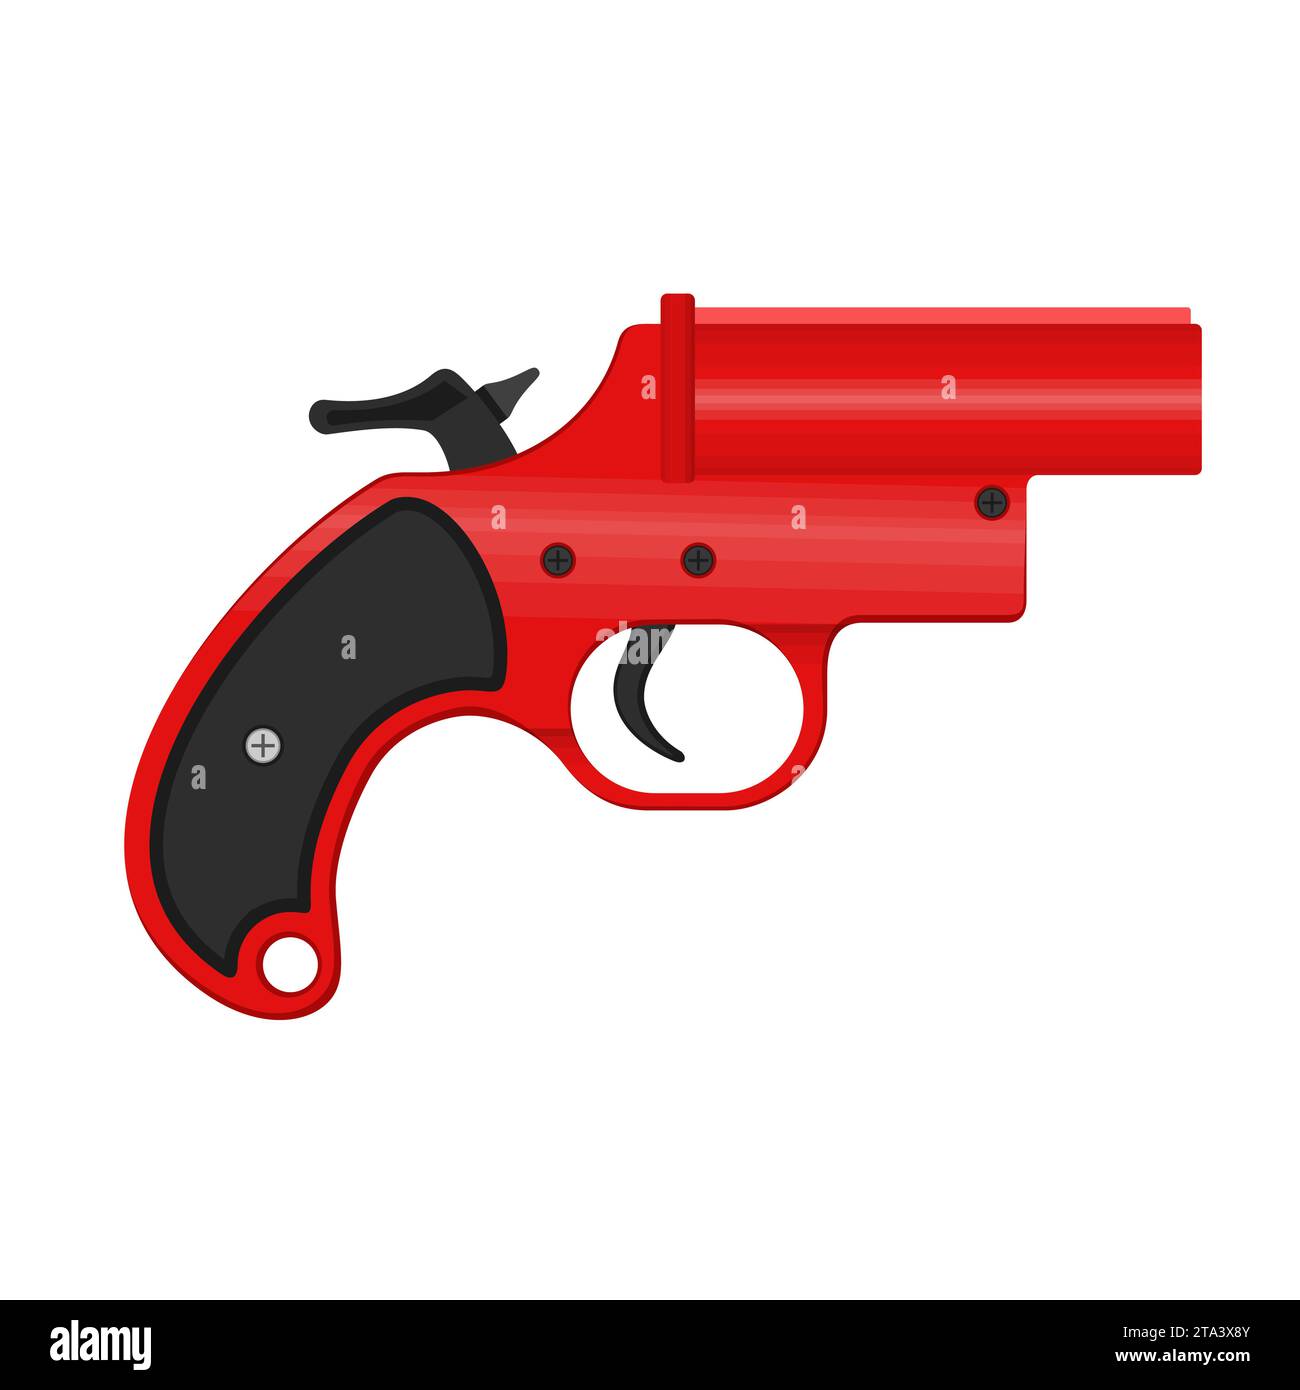 A flare gun, also known as a Very pistol or signal pistol, is a large-bore handgun that discharges flares. The flare gun is used for a distress signal Stock Vector